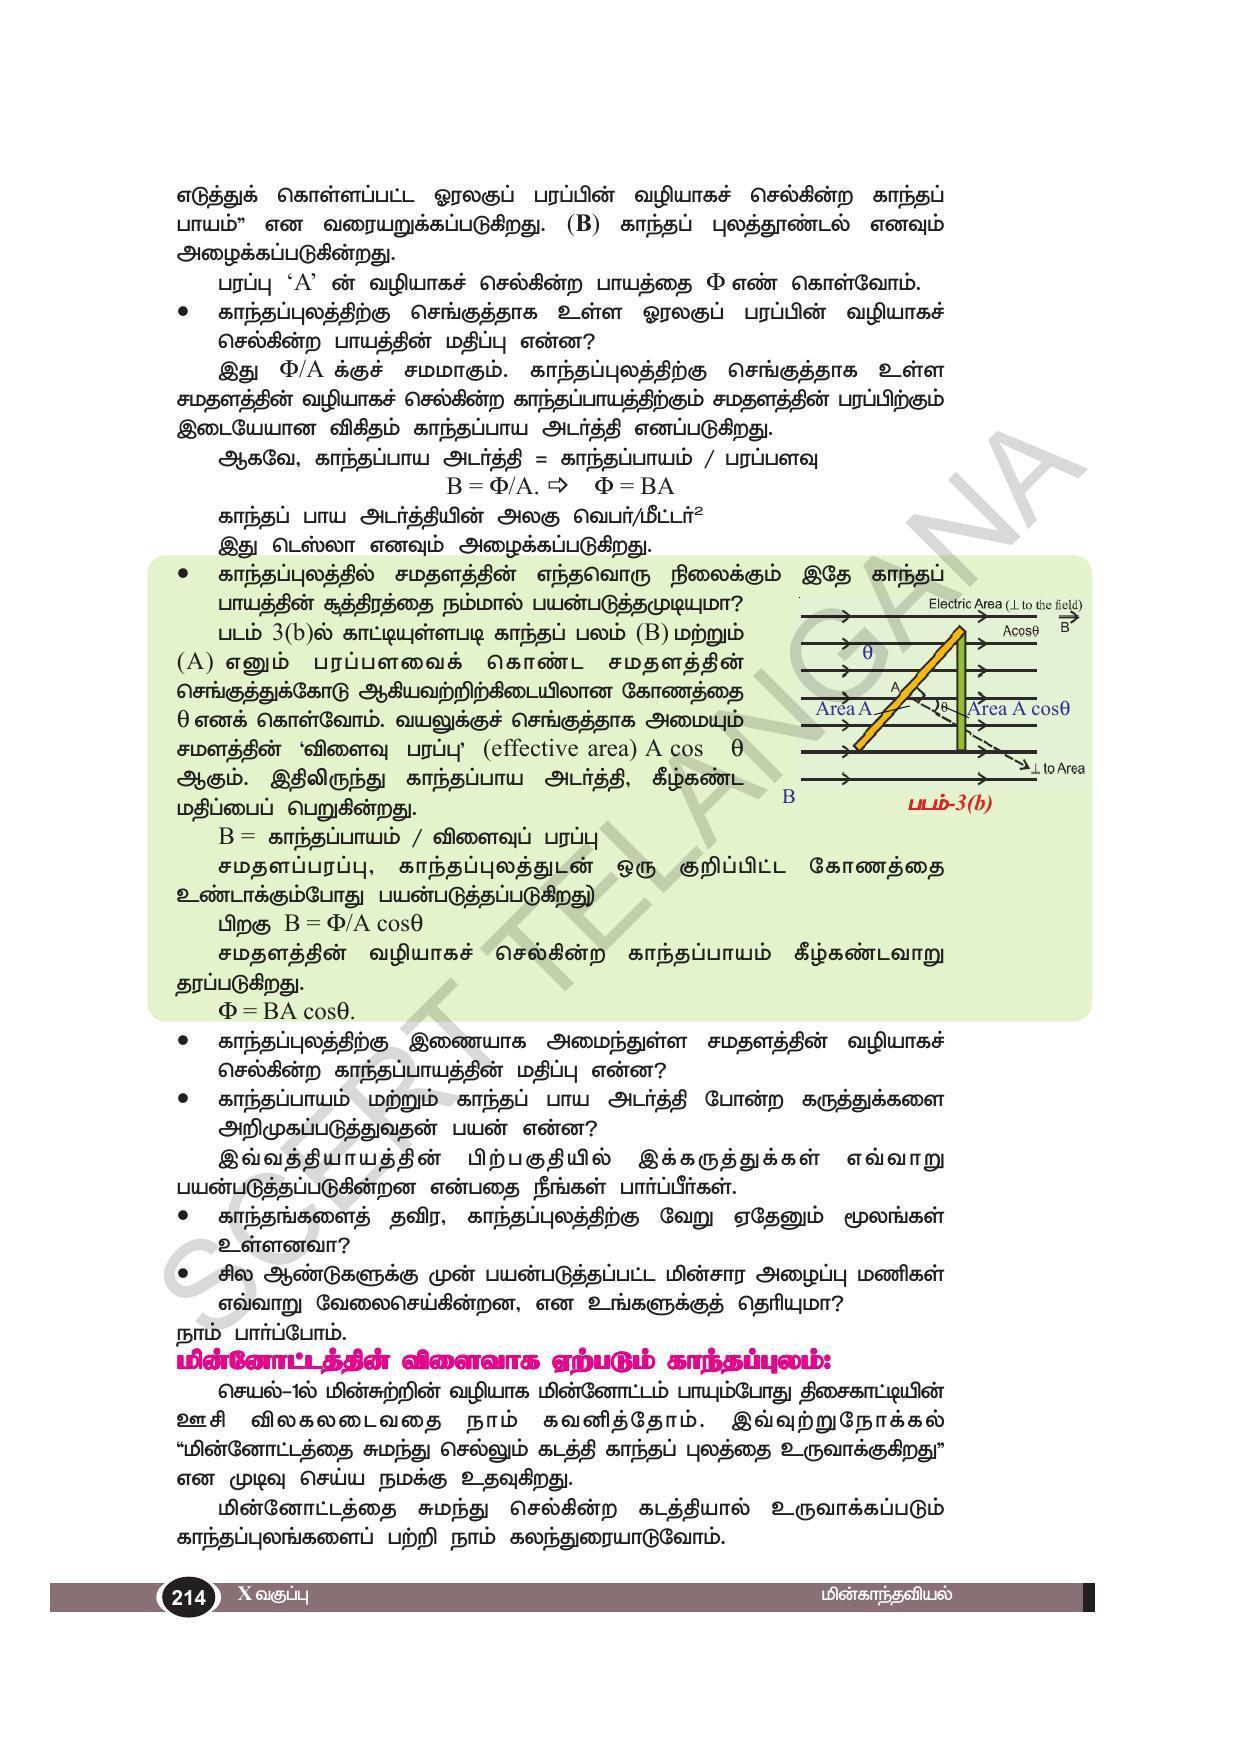 TS SCERT Class 10 Physical Science(Tamil Medium) Text Book - Page 226